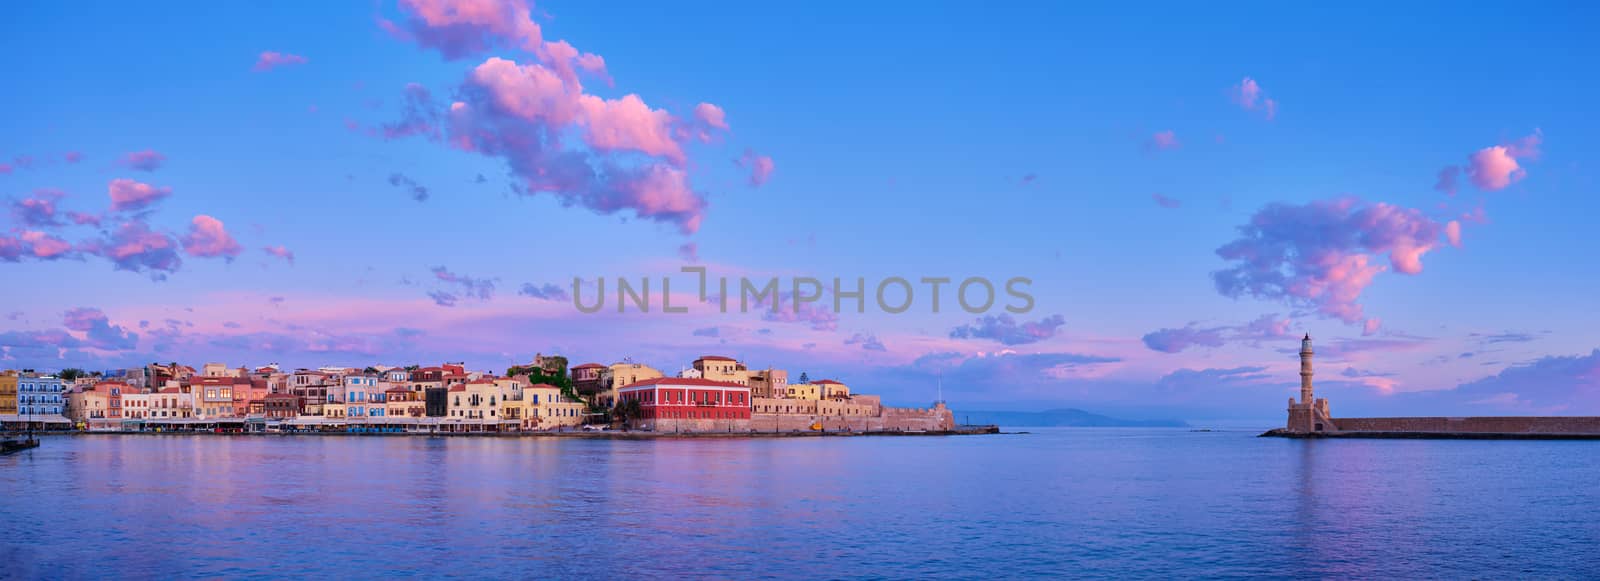 Panorama of picturesque old port of Chania is one of landmarks and tourist destinations of Crete island in the morning on sunrise. Chania, Crete, Greece